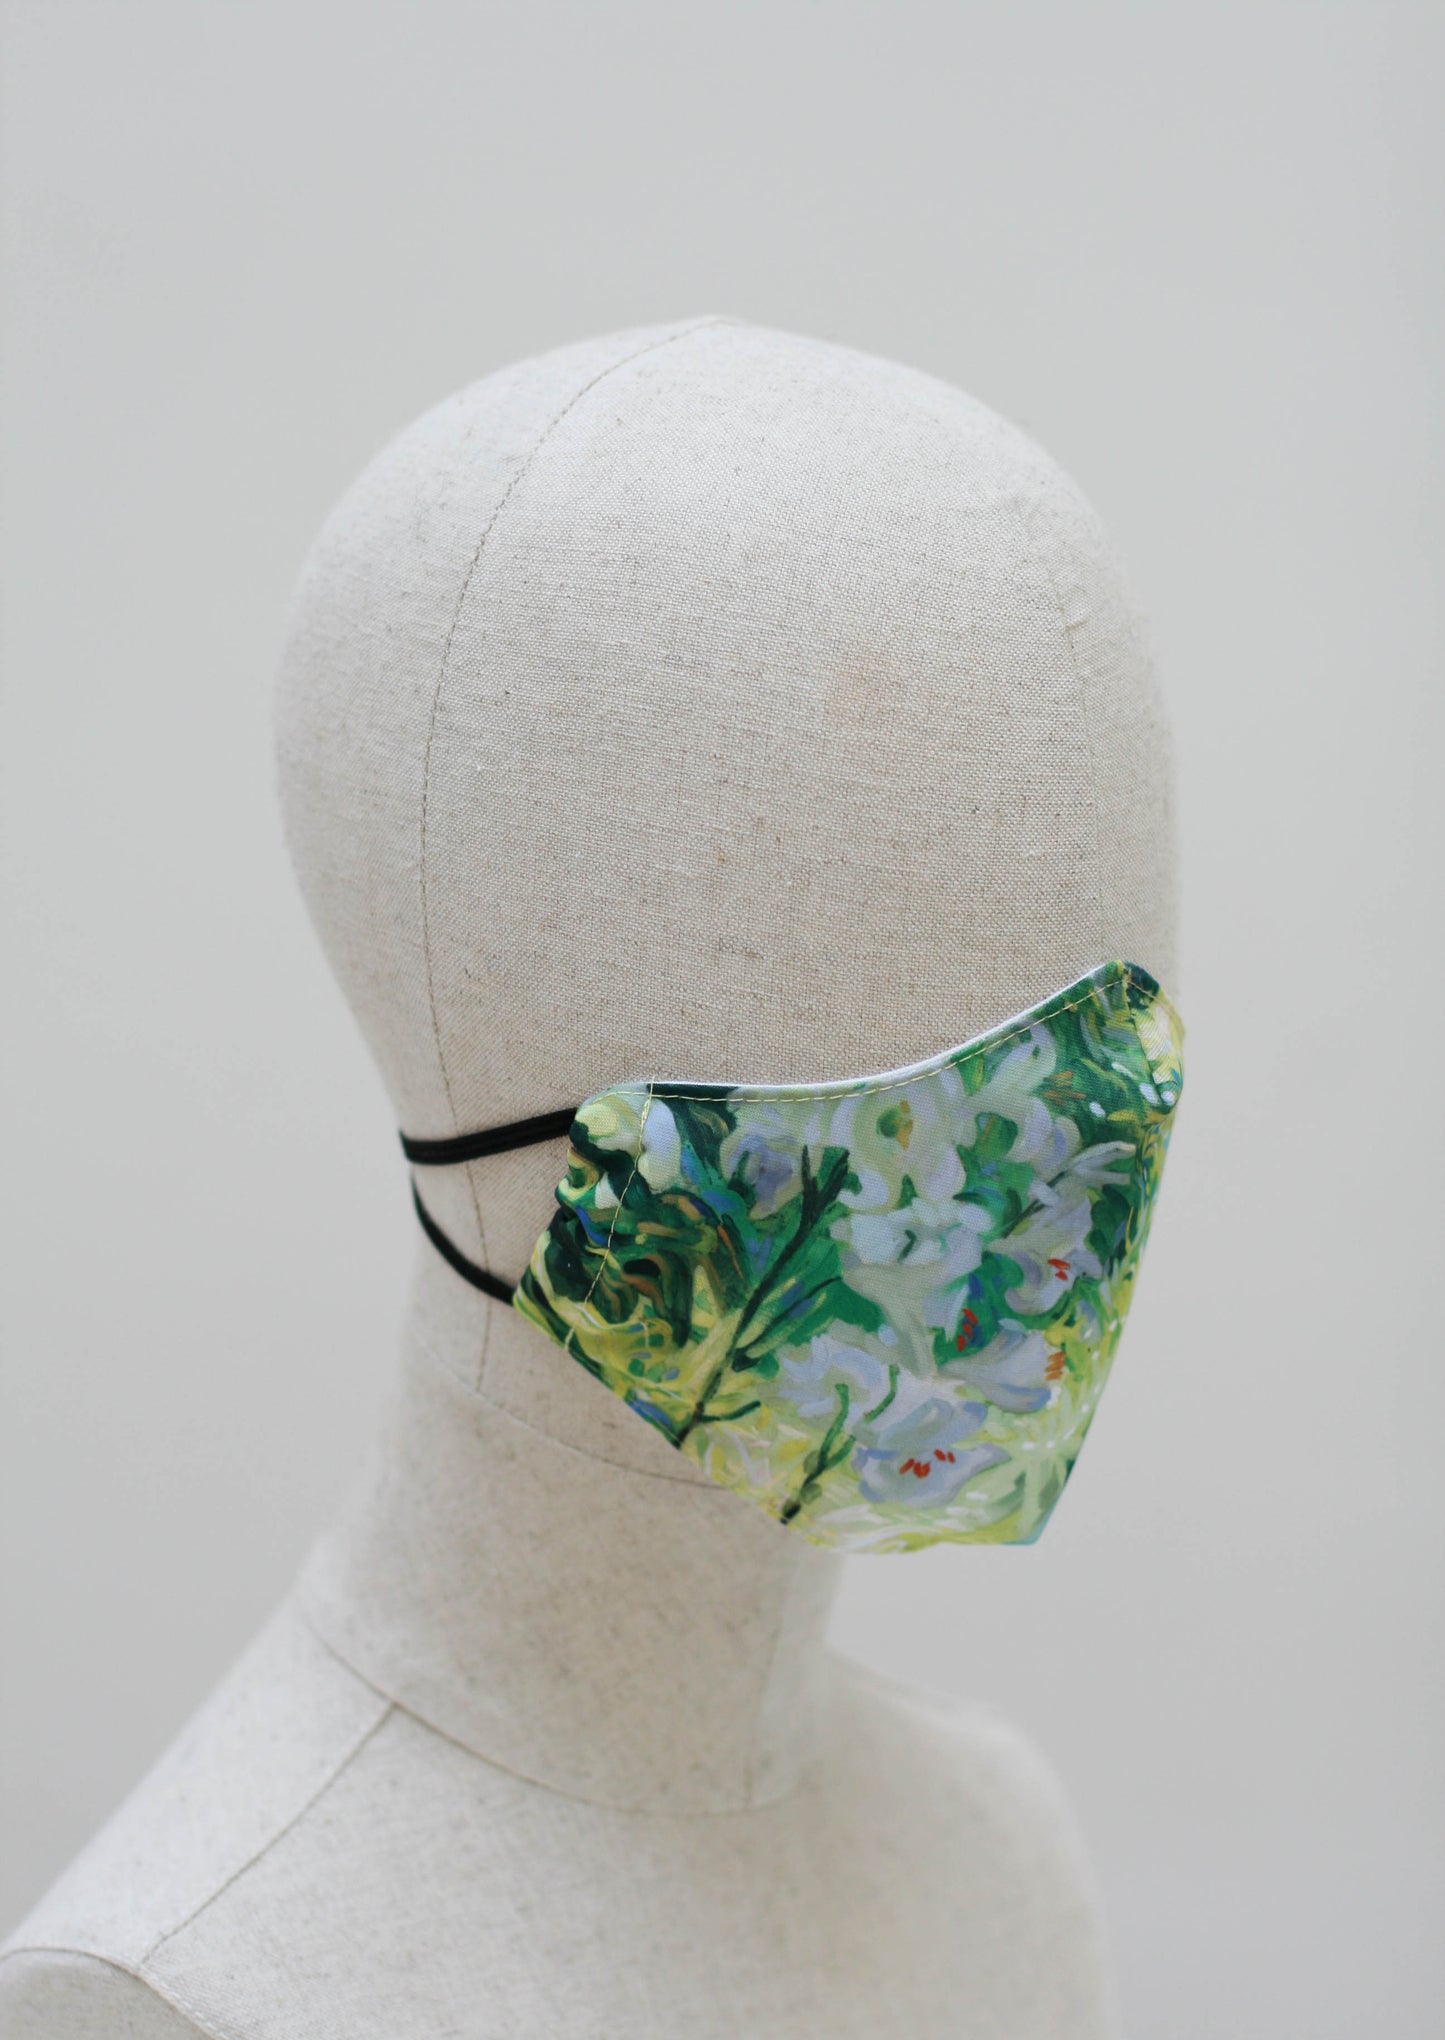 The mask on a mannequin head from the other side, showing more flowers with darker green leaves as the plants are in the shade.